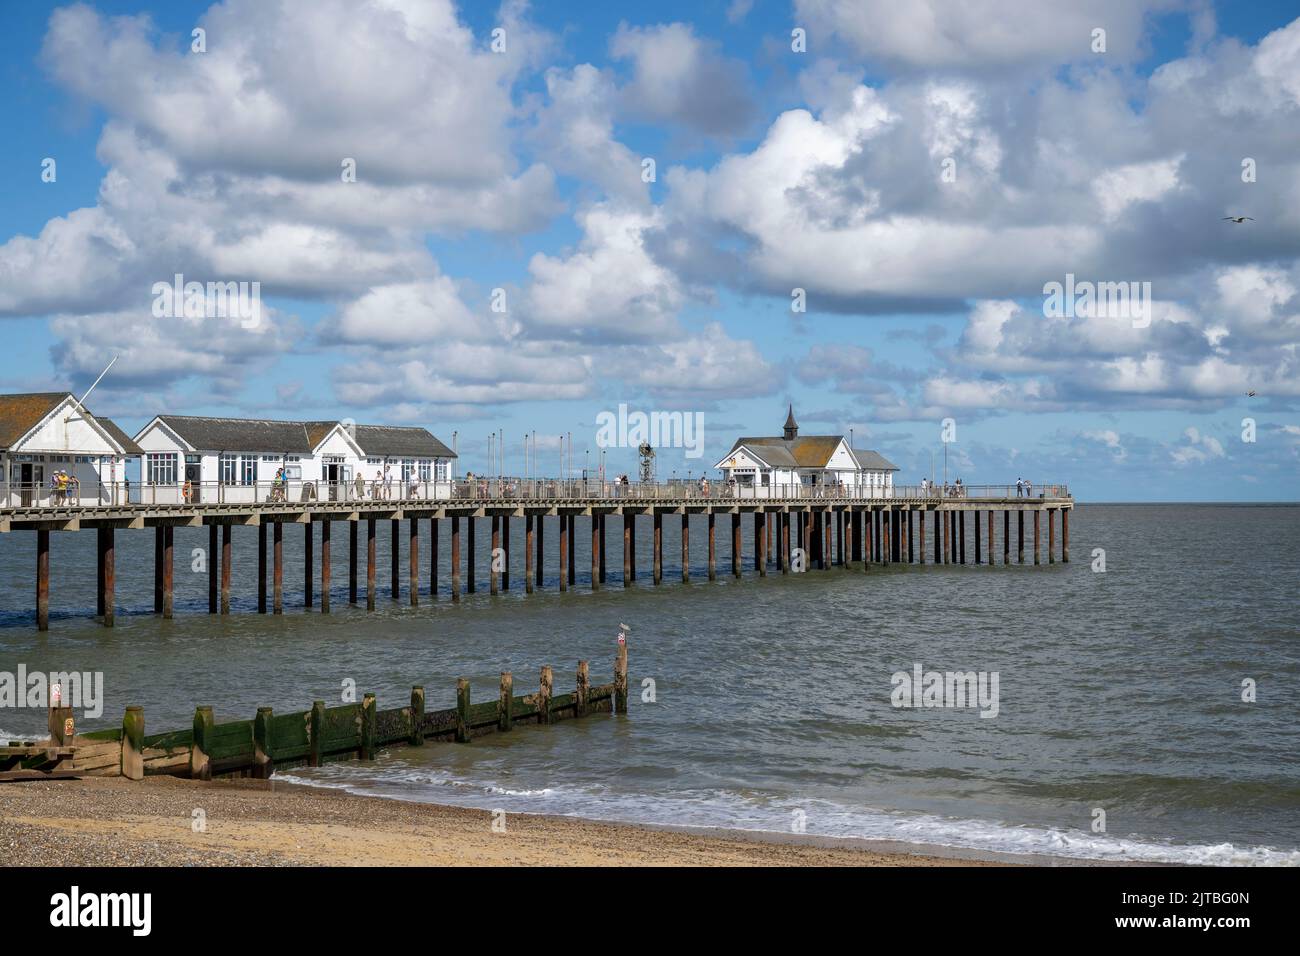 A general view of Southwold Pier in Southwold, Suffolk, England. Stock Photo